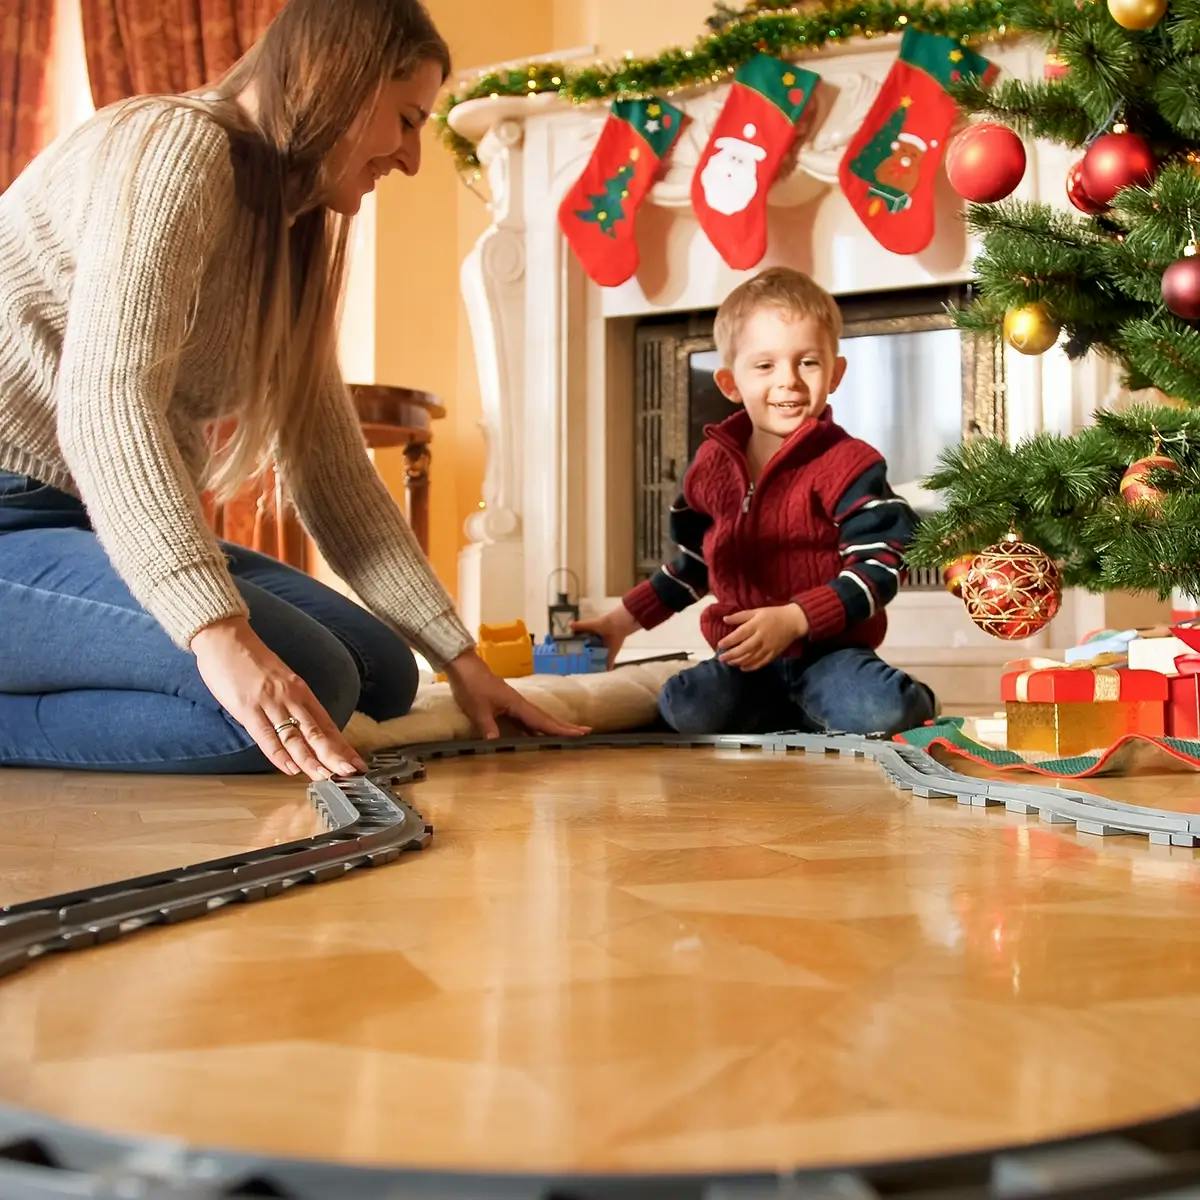 Mother and son play with model train set under Christmas tree.